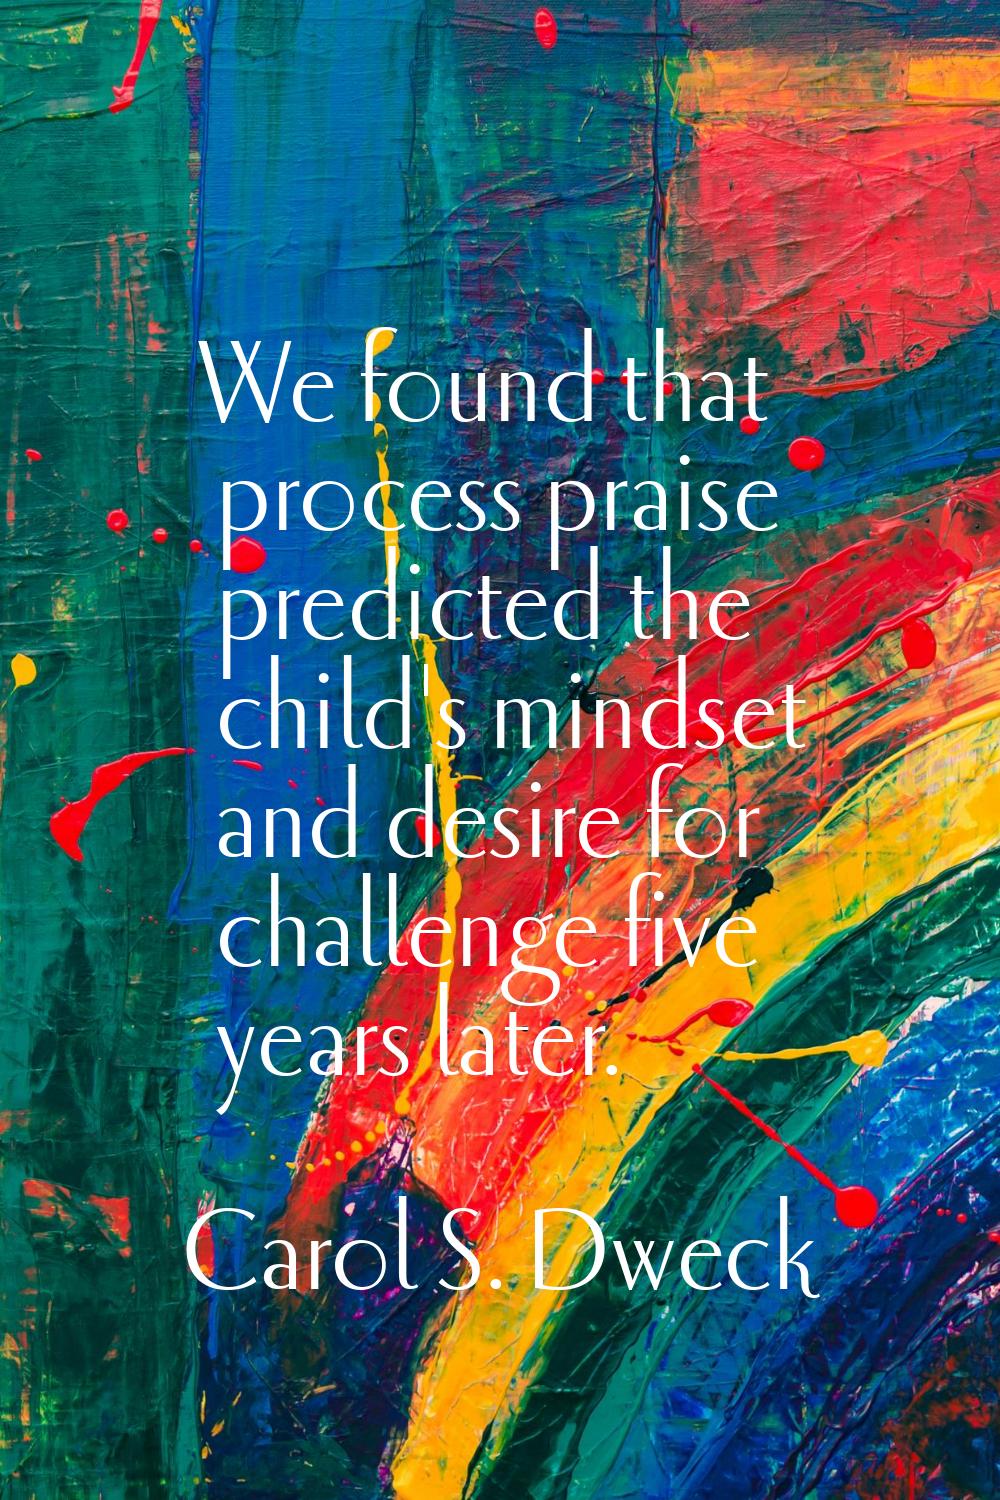 We found that process praise predicted the child's mindset and desire for challenge five years late